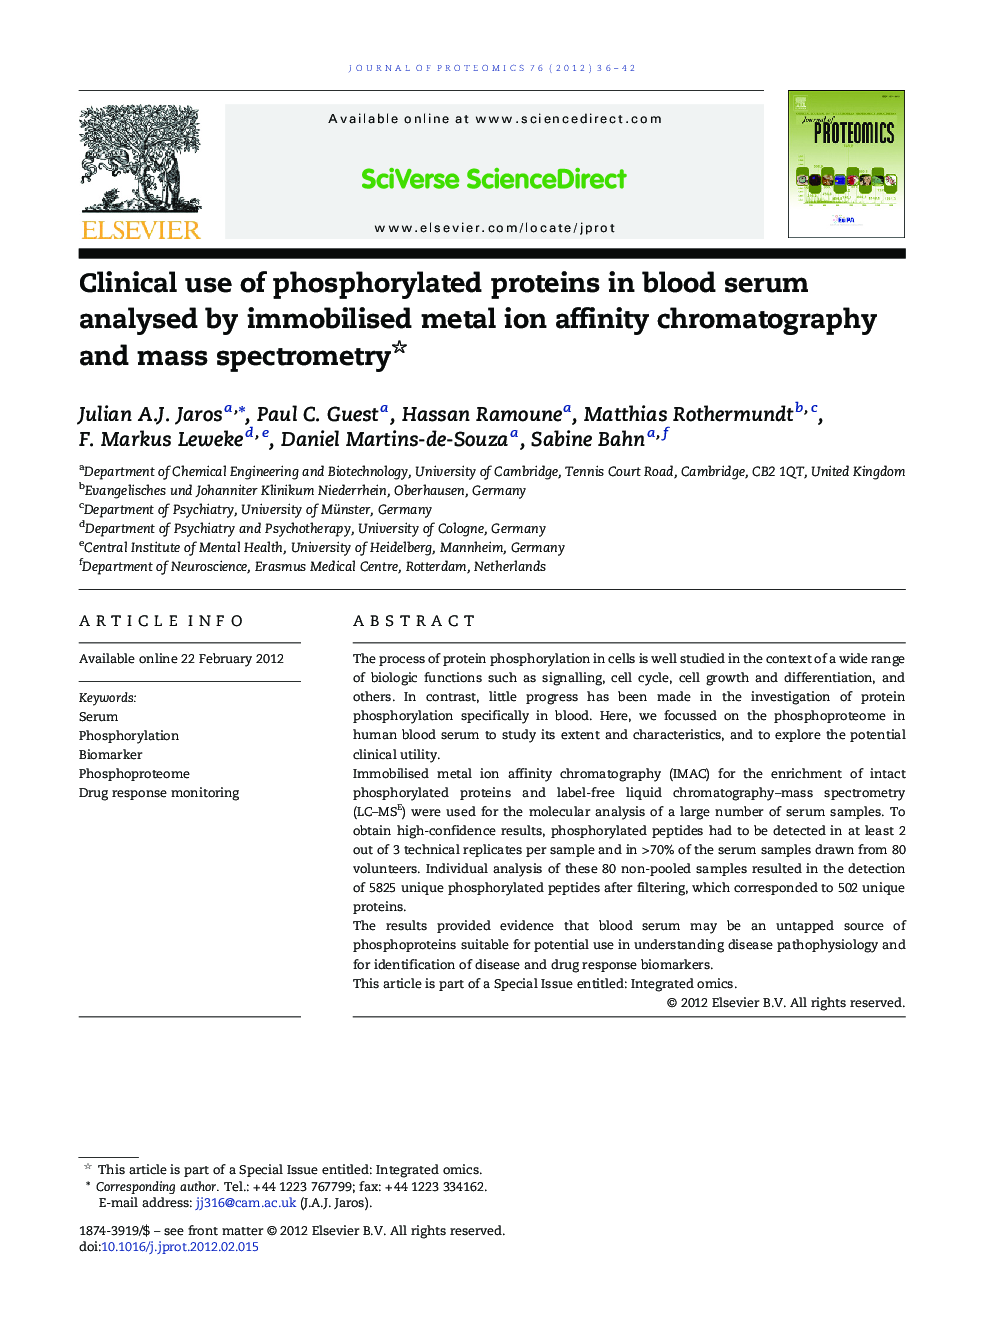 Clinical use of phosphorylated proteins in blood serum analysed by immobilised metal ion affinity chromatography and mass spectrometry